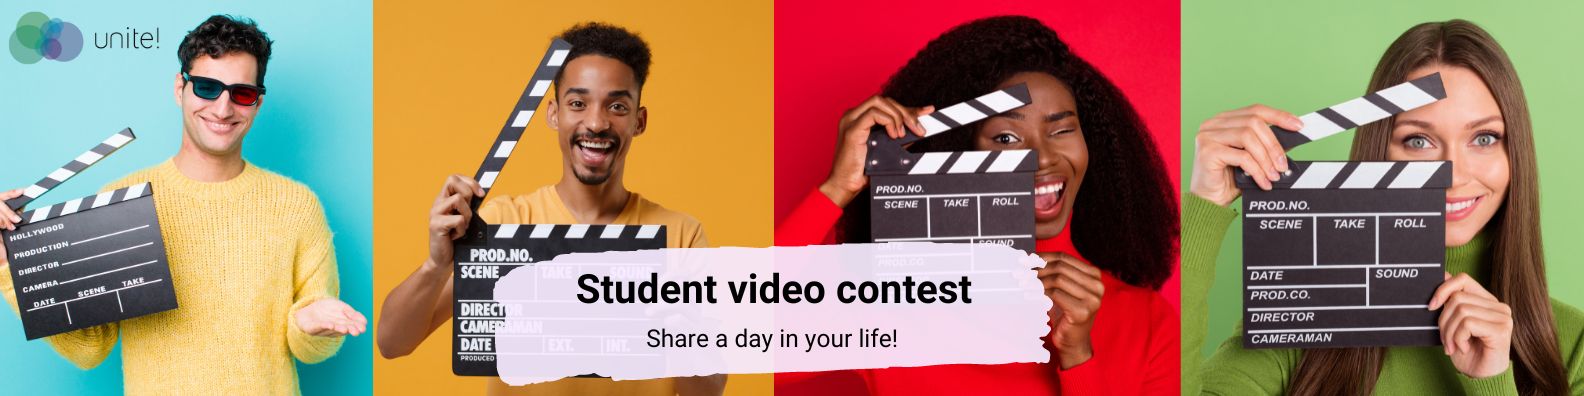 Course Student video contest